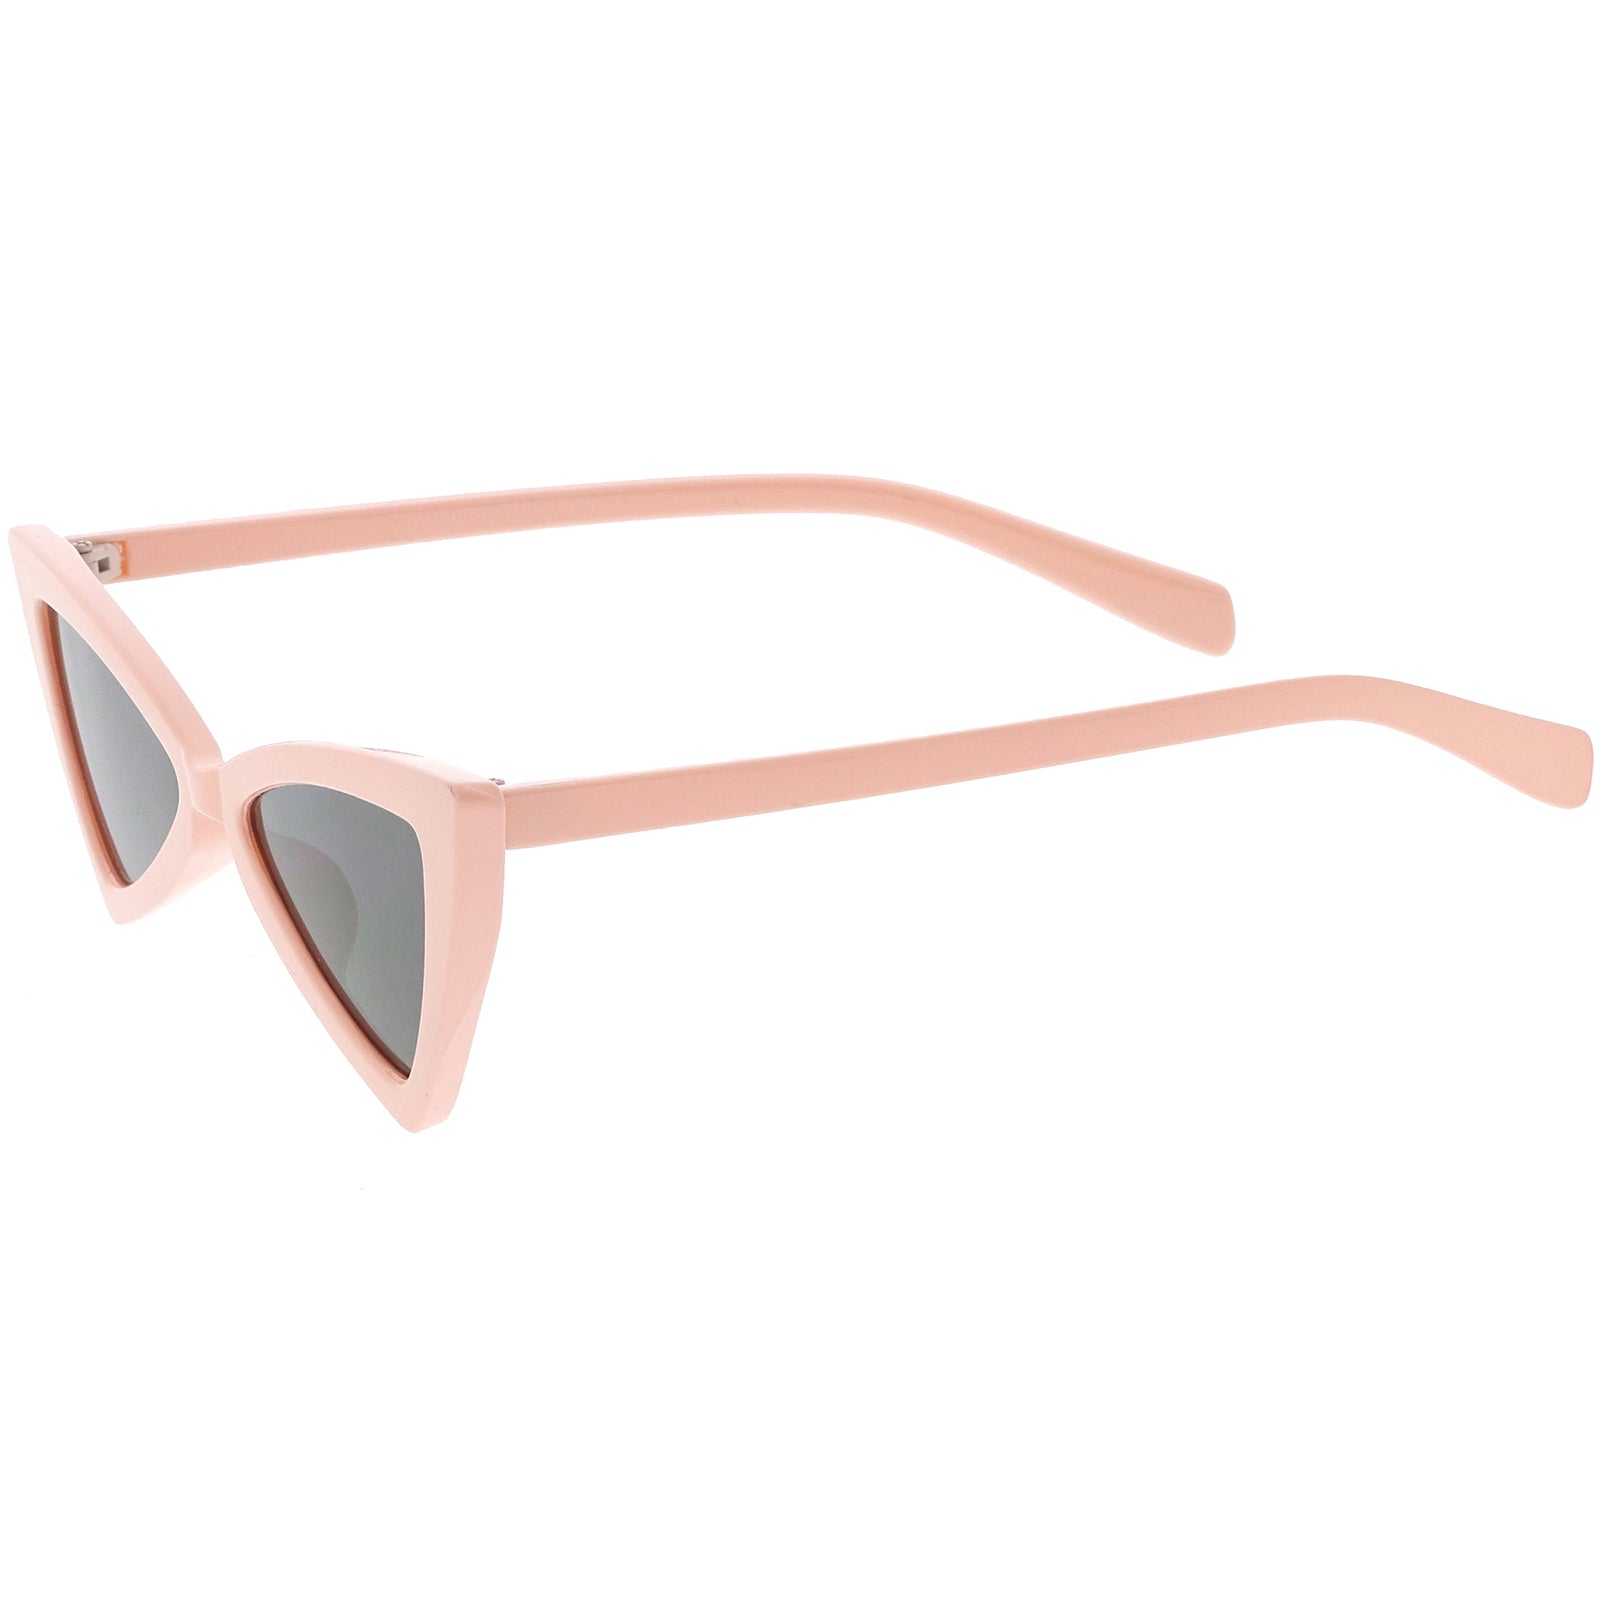 Women's Thin Extreme Cat Eye Sunglasses Neutral Colored Flat Lens 51mm, Pink / Smoke